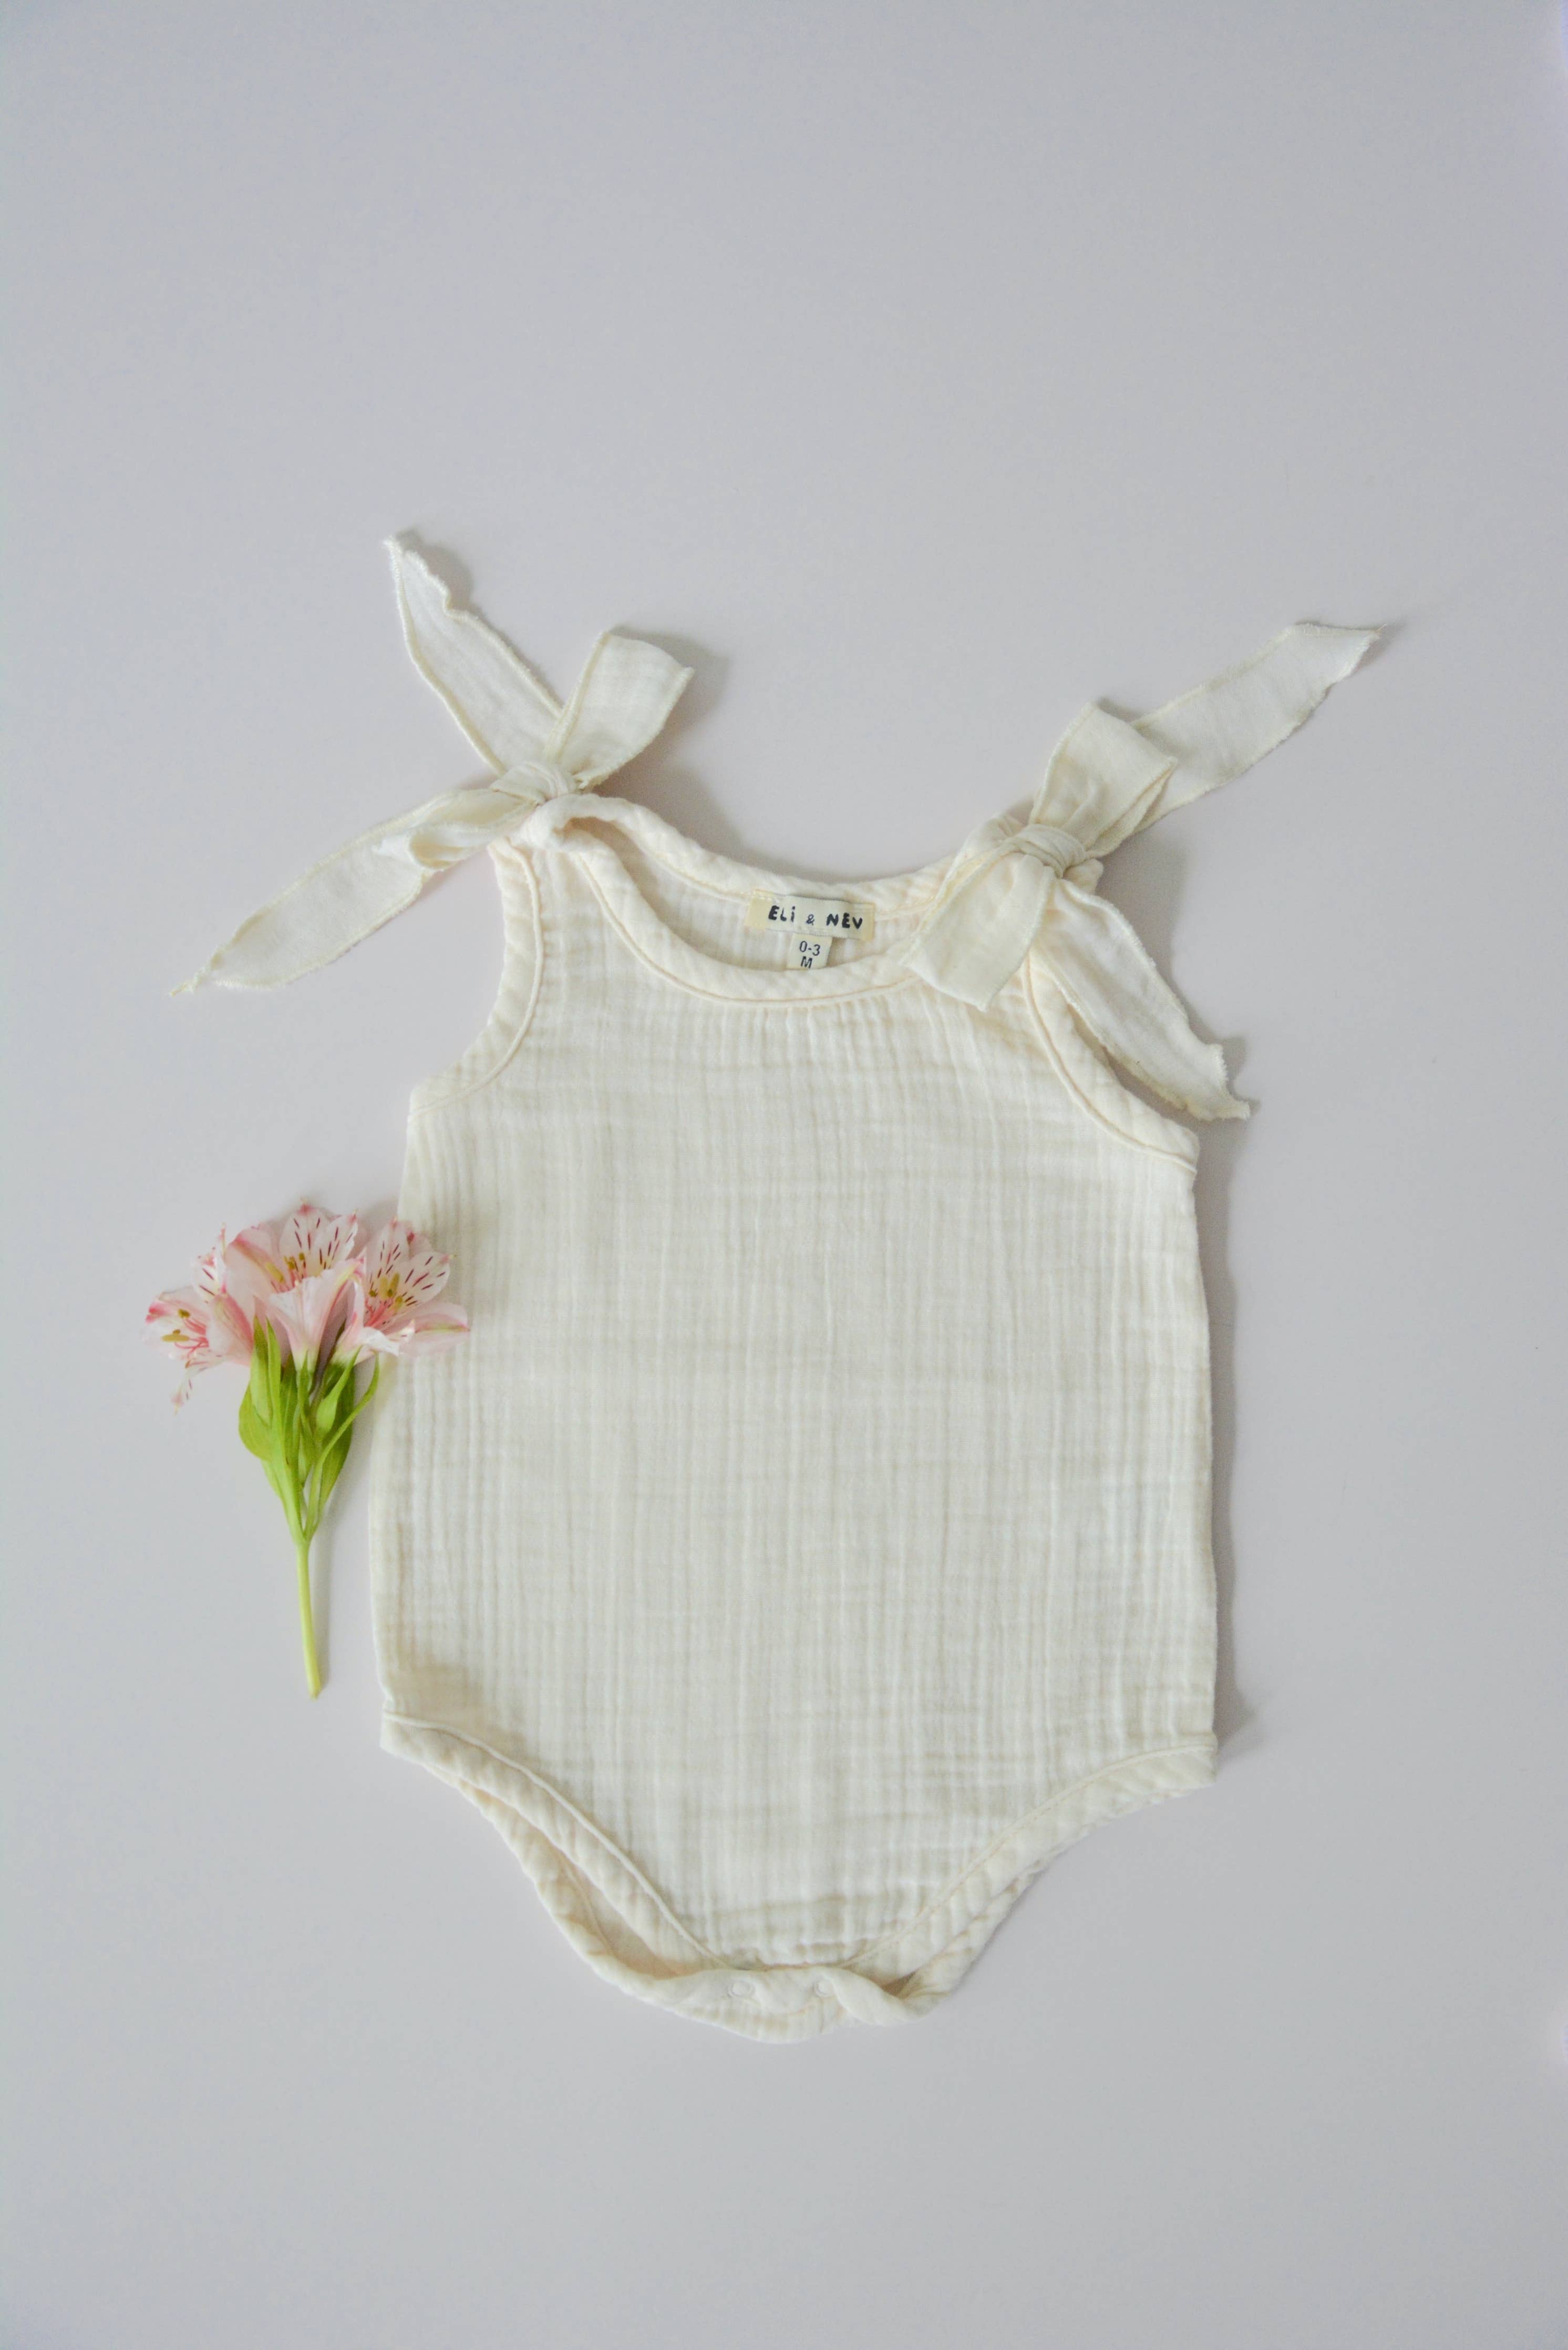 NORA romper - summer muslin bodysuit for babies made from 100% cotton